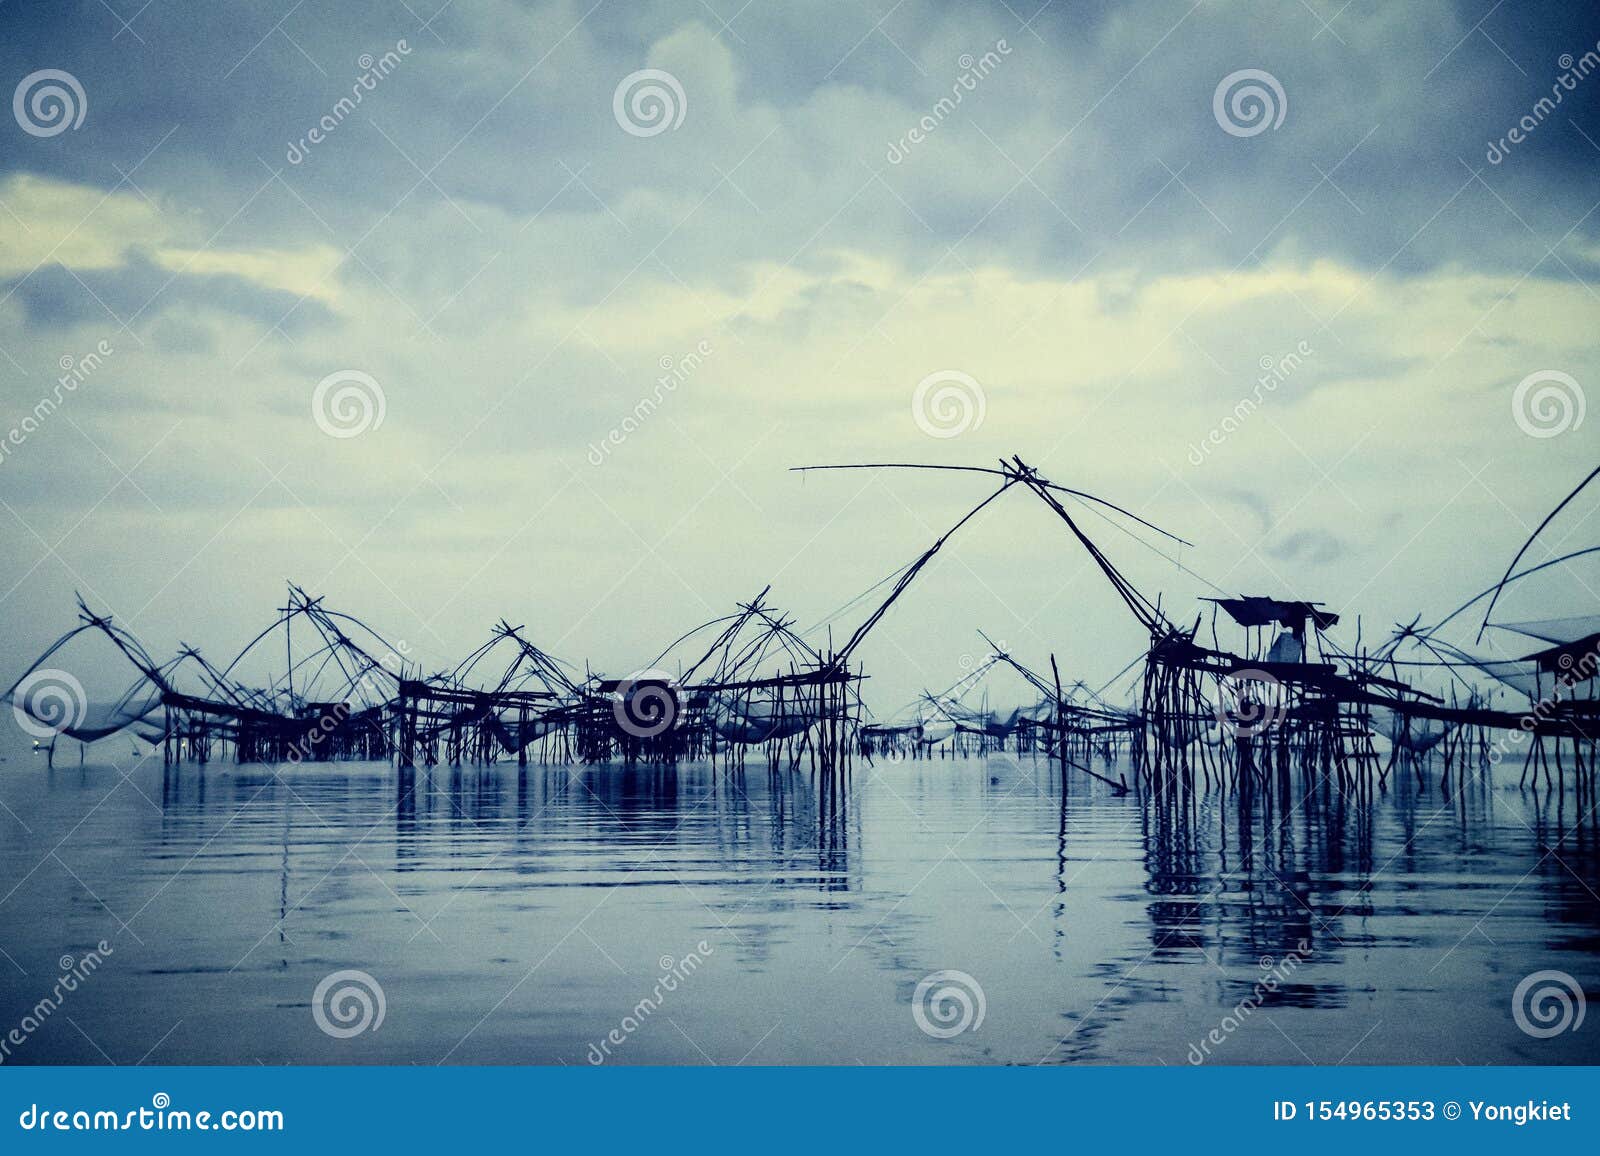 https://thumbs.dreamstime.com/z/vintage-style-old-photo-local-fishing-tool-cool-blue-tone-thailand-two-landscapes-songkhla-lake-square-dip-net-154965353.jpg